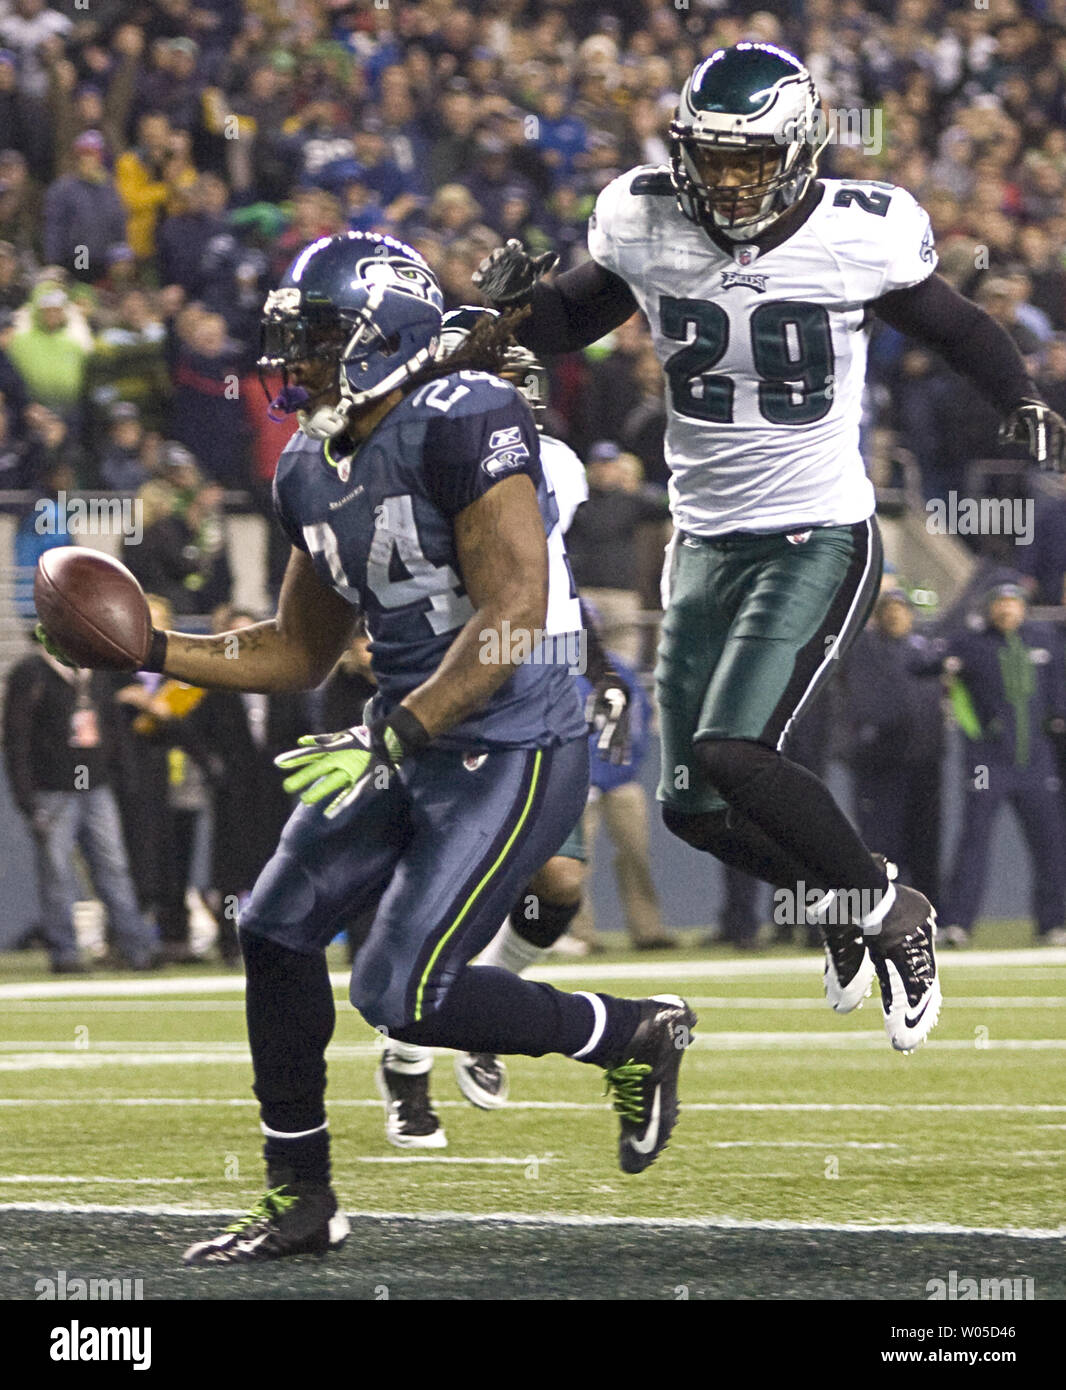 Seattle Seahawks running back Marshawn Lynch runs past Philadelphia Eagles free safety Earl Thomas for a first quarter touchdown at CenturyLink Field in Seattle, Washington on December 1, 2011. The Seahawks beat the Eagles 31-14.  UPI/Jim Bryant Stock Photo